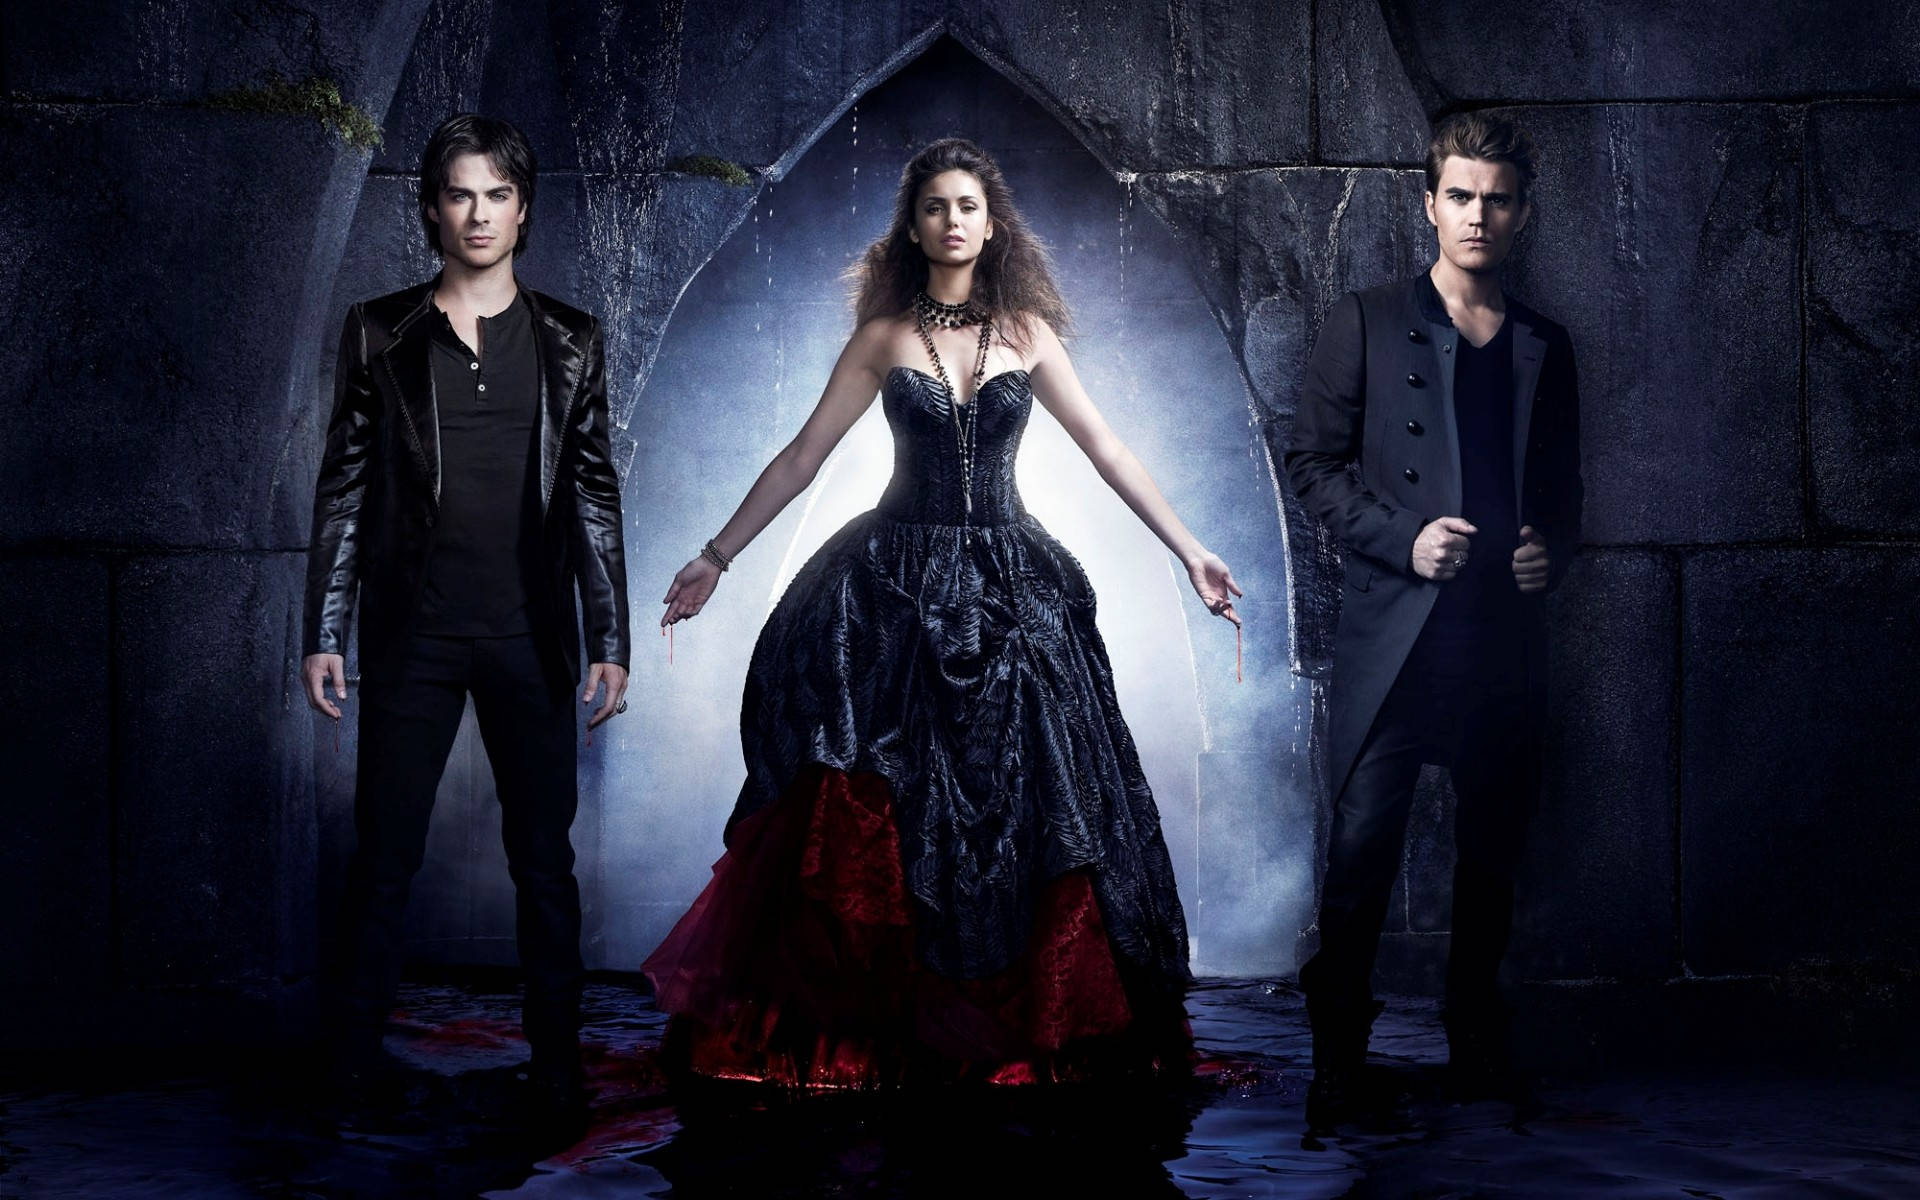 The Vampire Diaries Cast In Gothic Formal Outfits Wallpaper